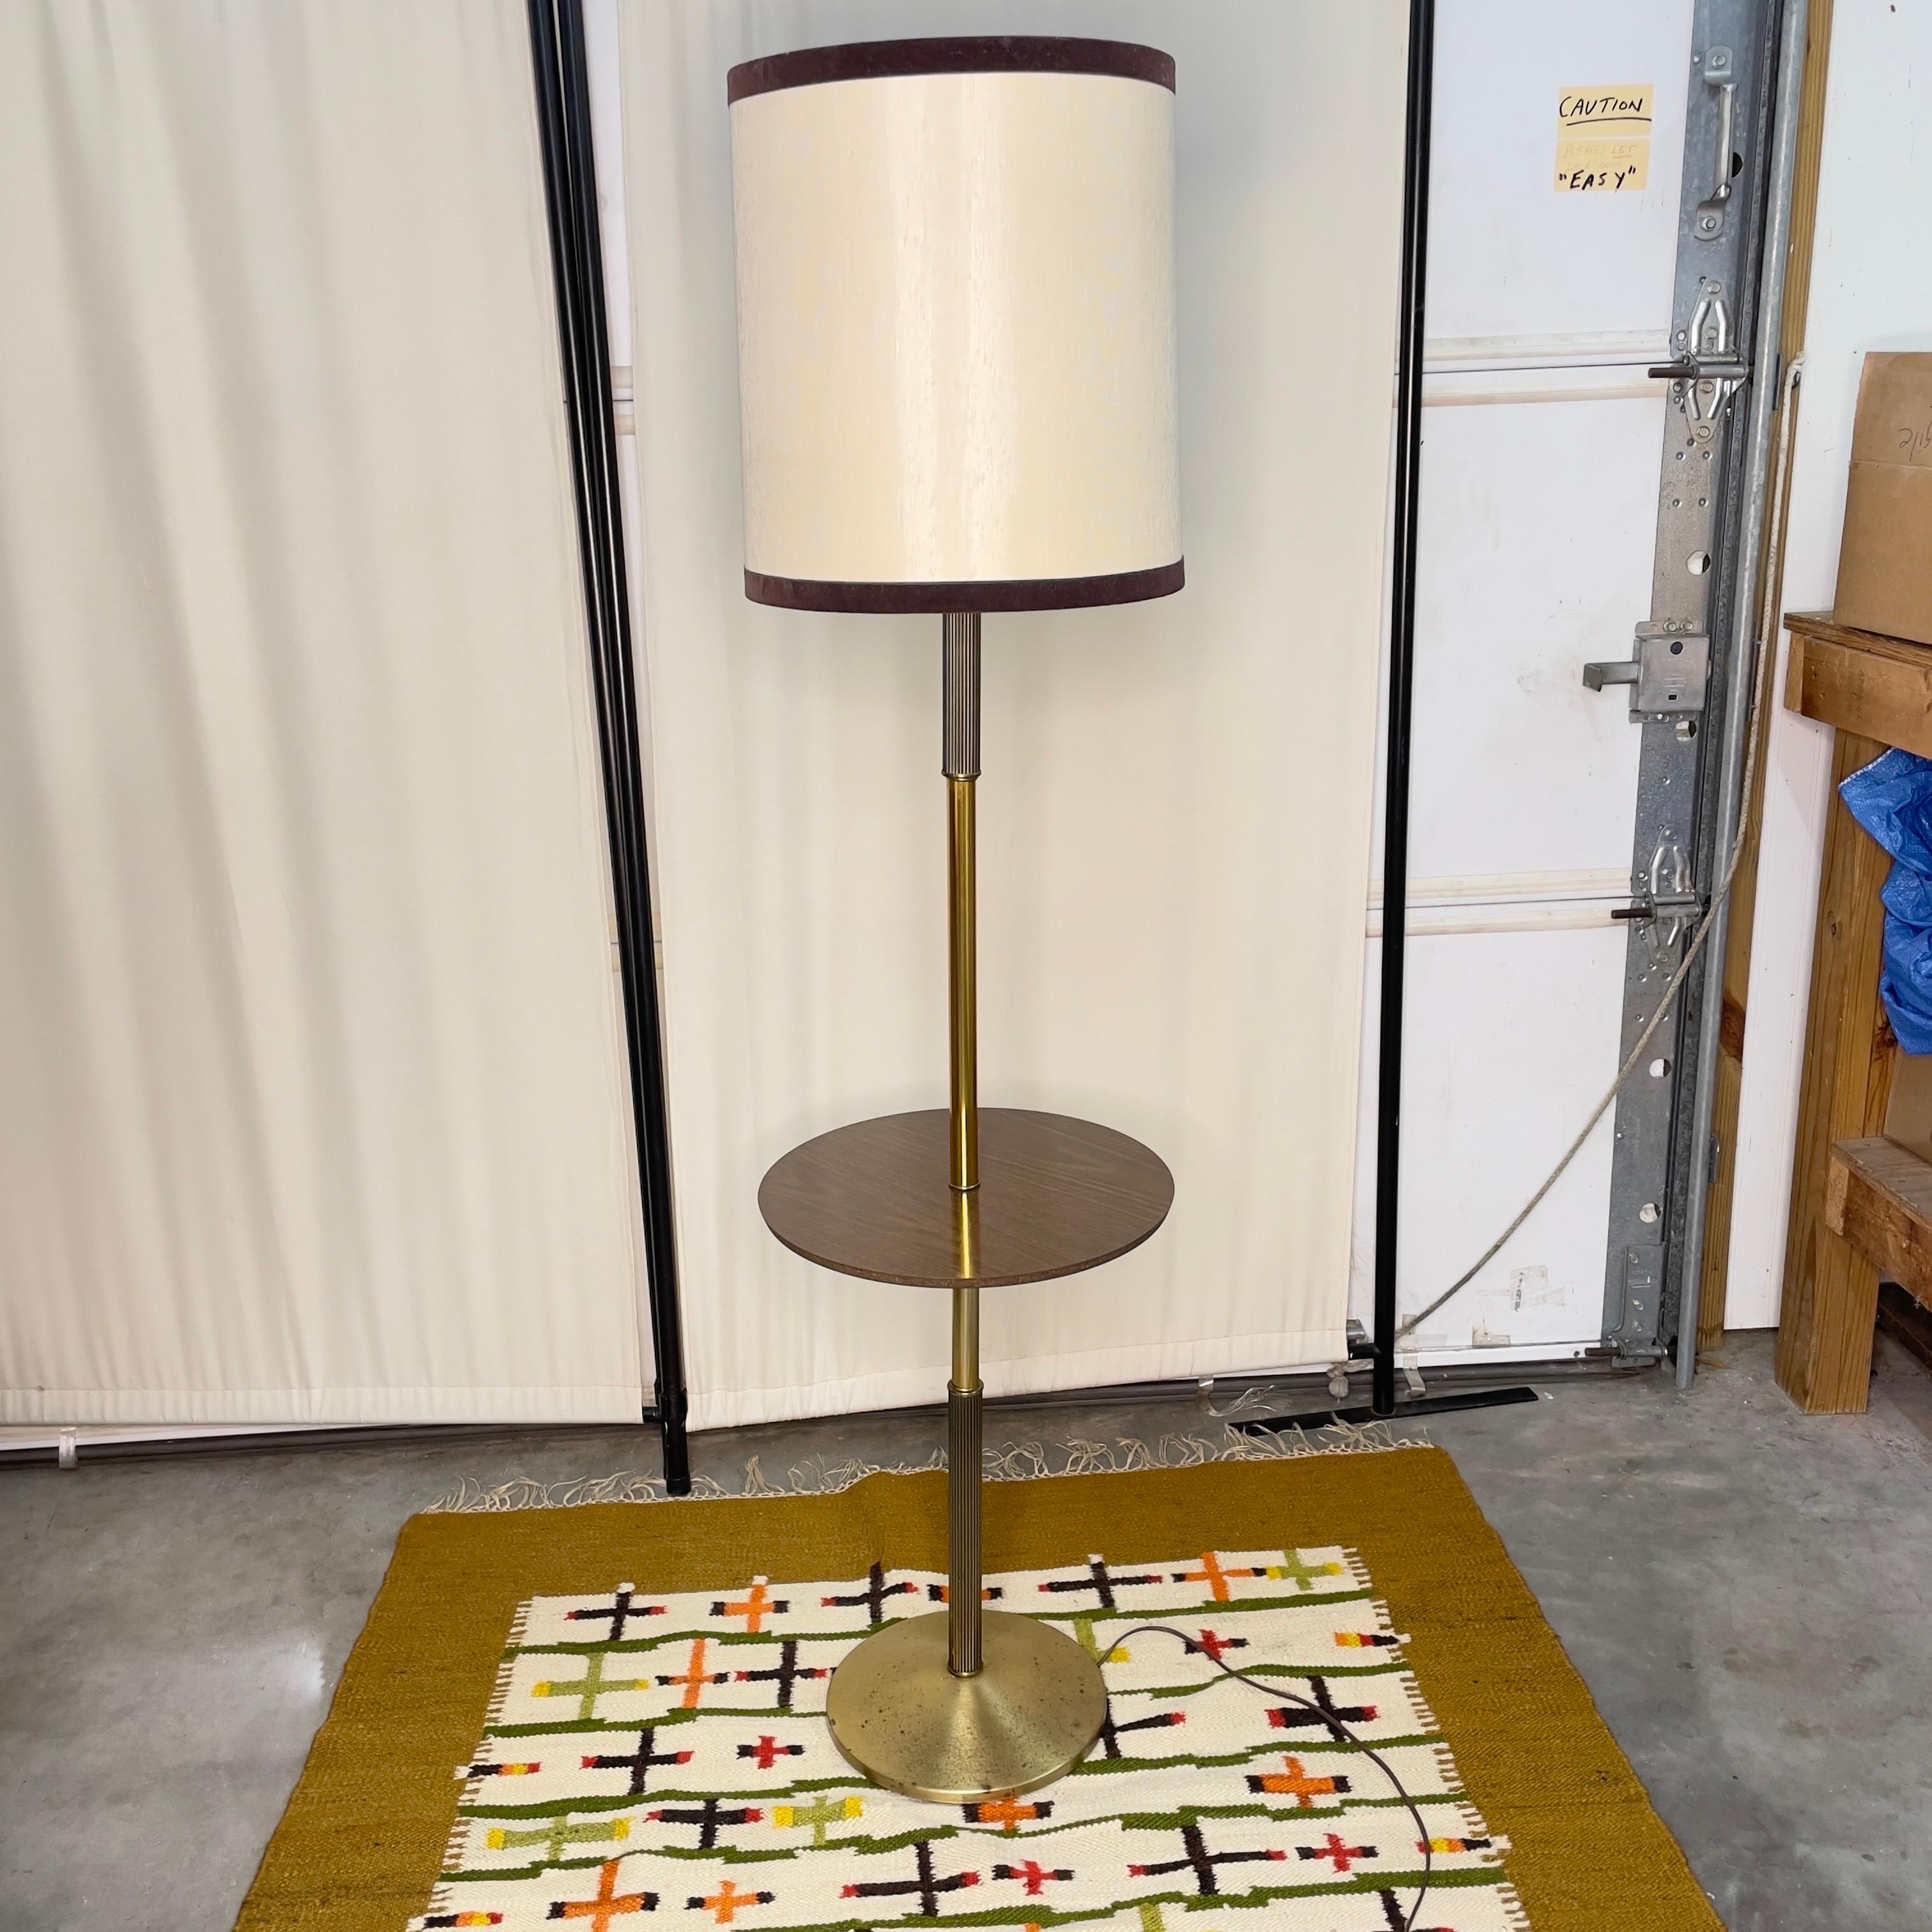 Mid century modern floor lamp with table attached mid way on the lamp. Includes the original shade which is in good condition. Original plug in working condition. Laminate table top which means you don’t have to worry about water rings!